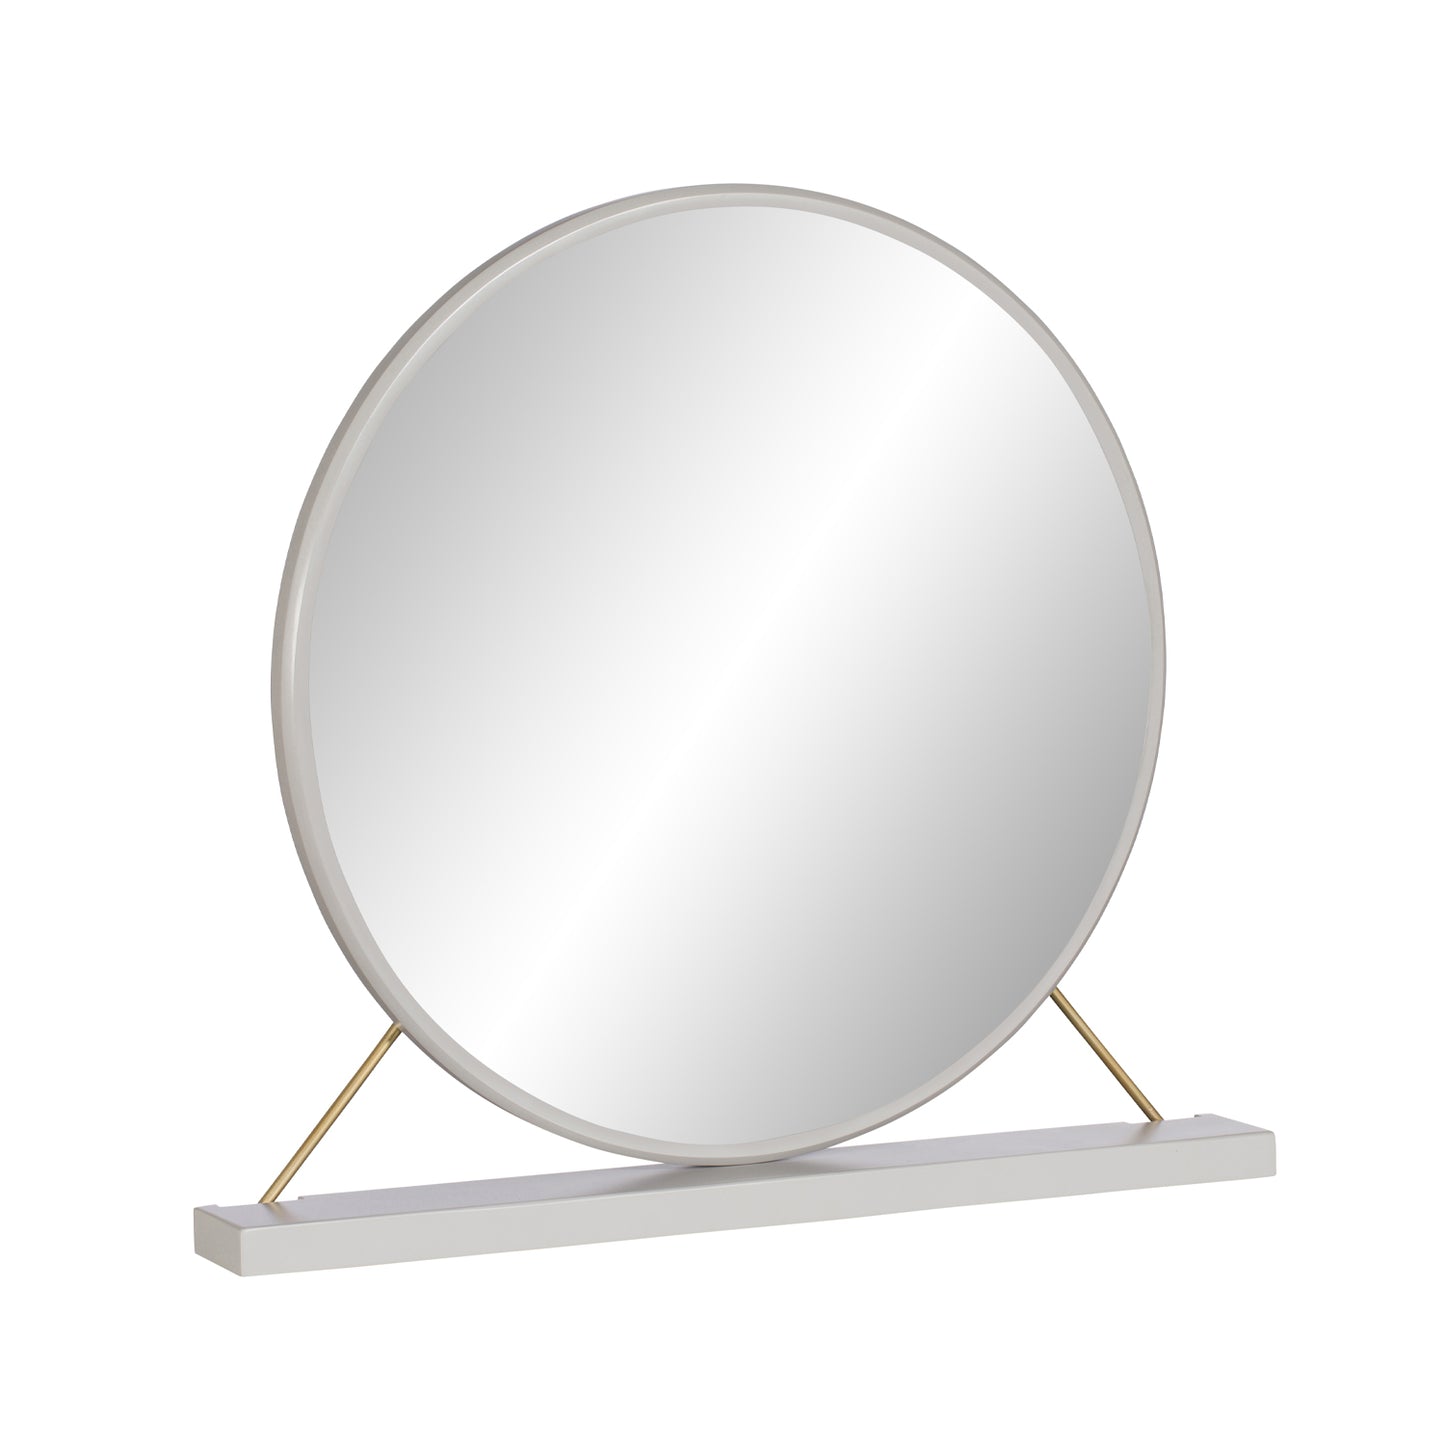 Starbeck Dressing Table Mirror